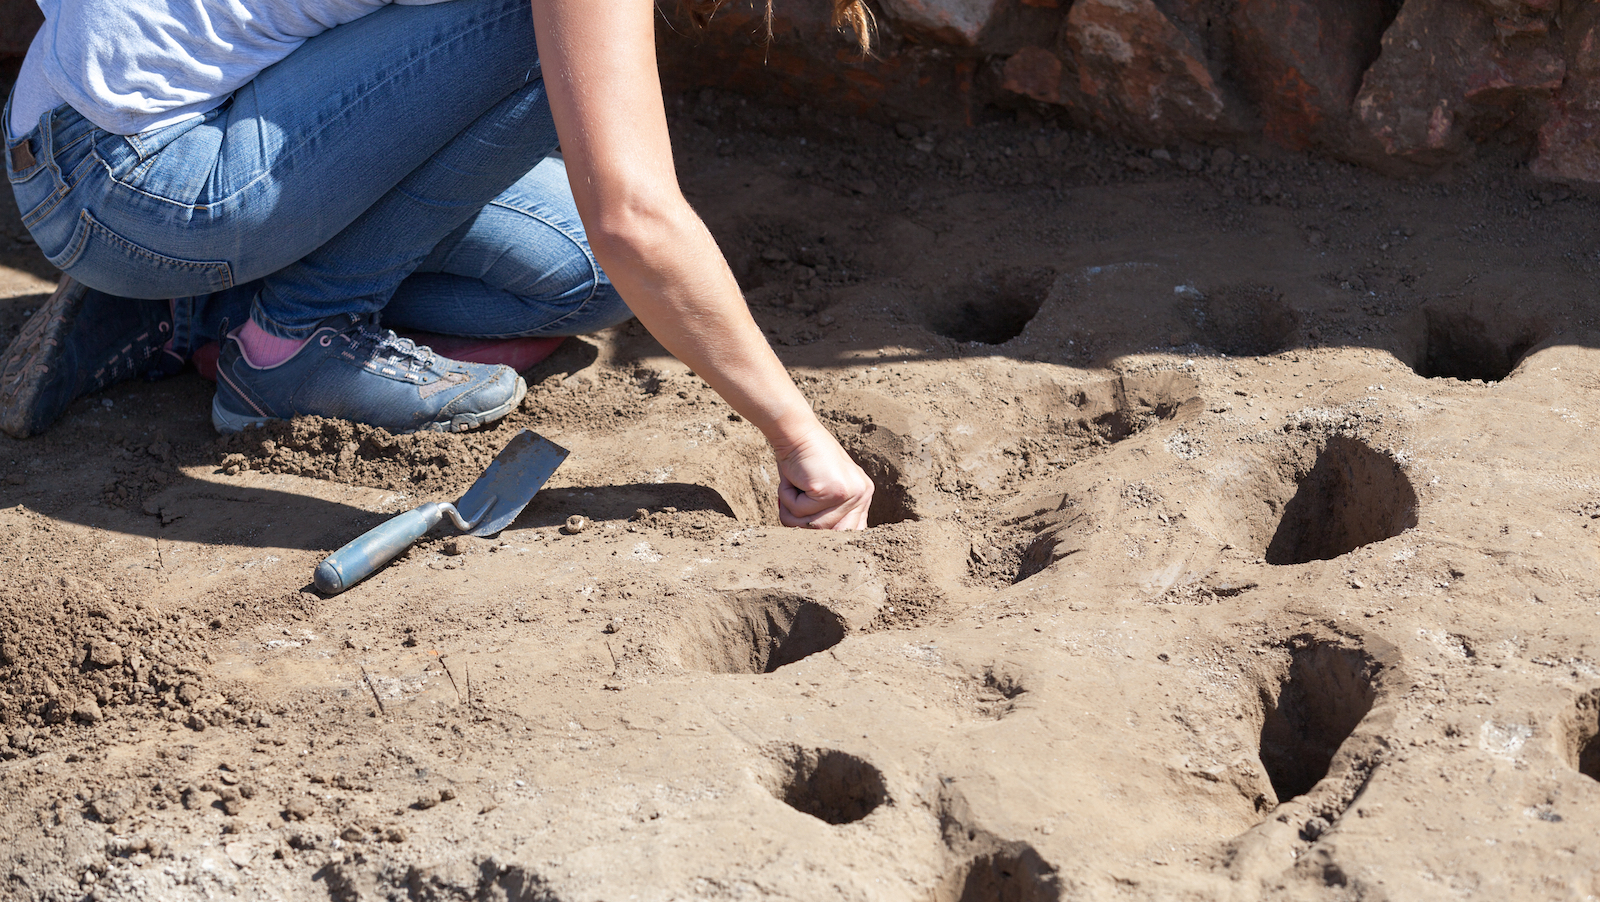 Archaeologist digging holes at archaeological site